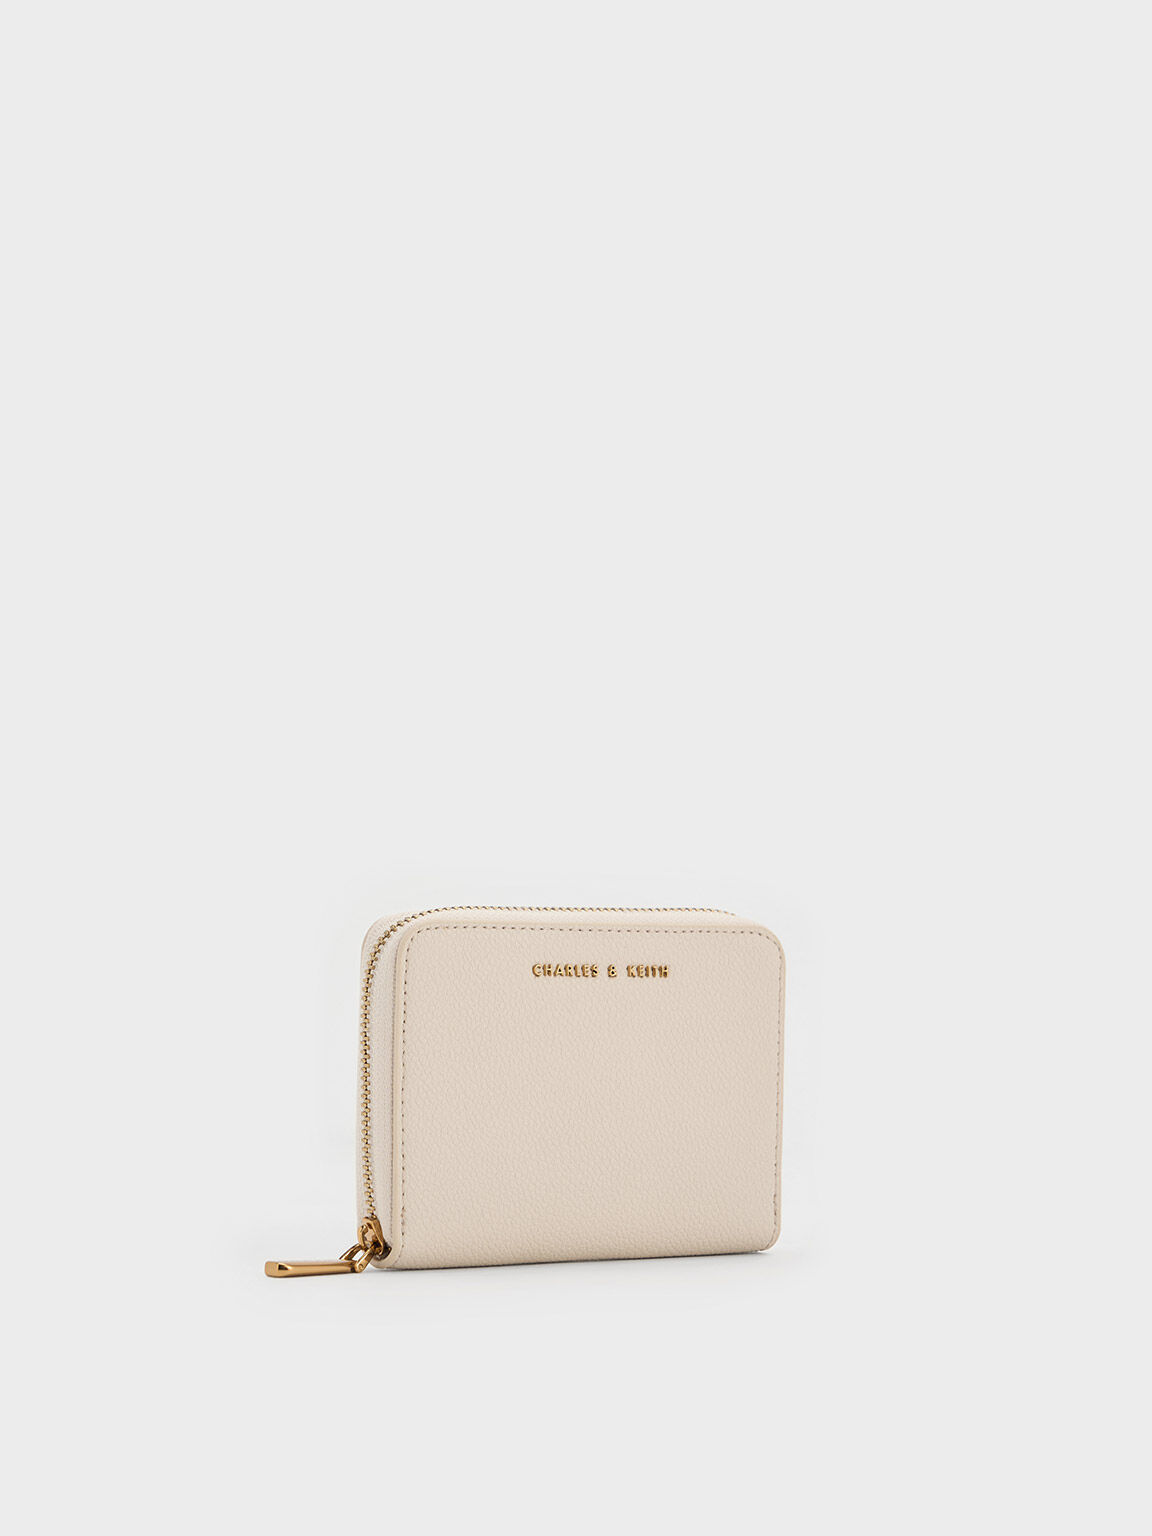 Ivory Basic Square Wallet - CHARLES & KEITH PH